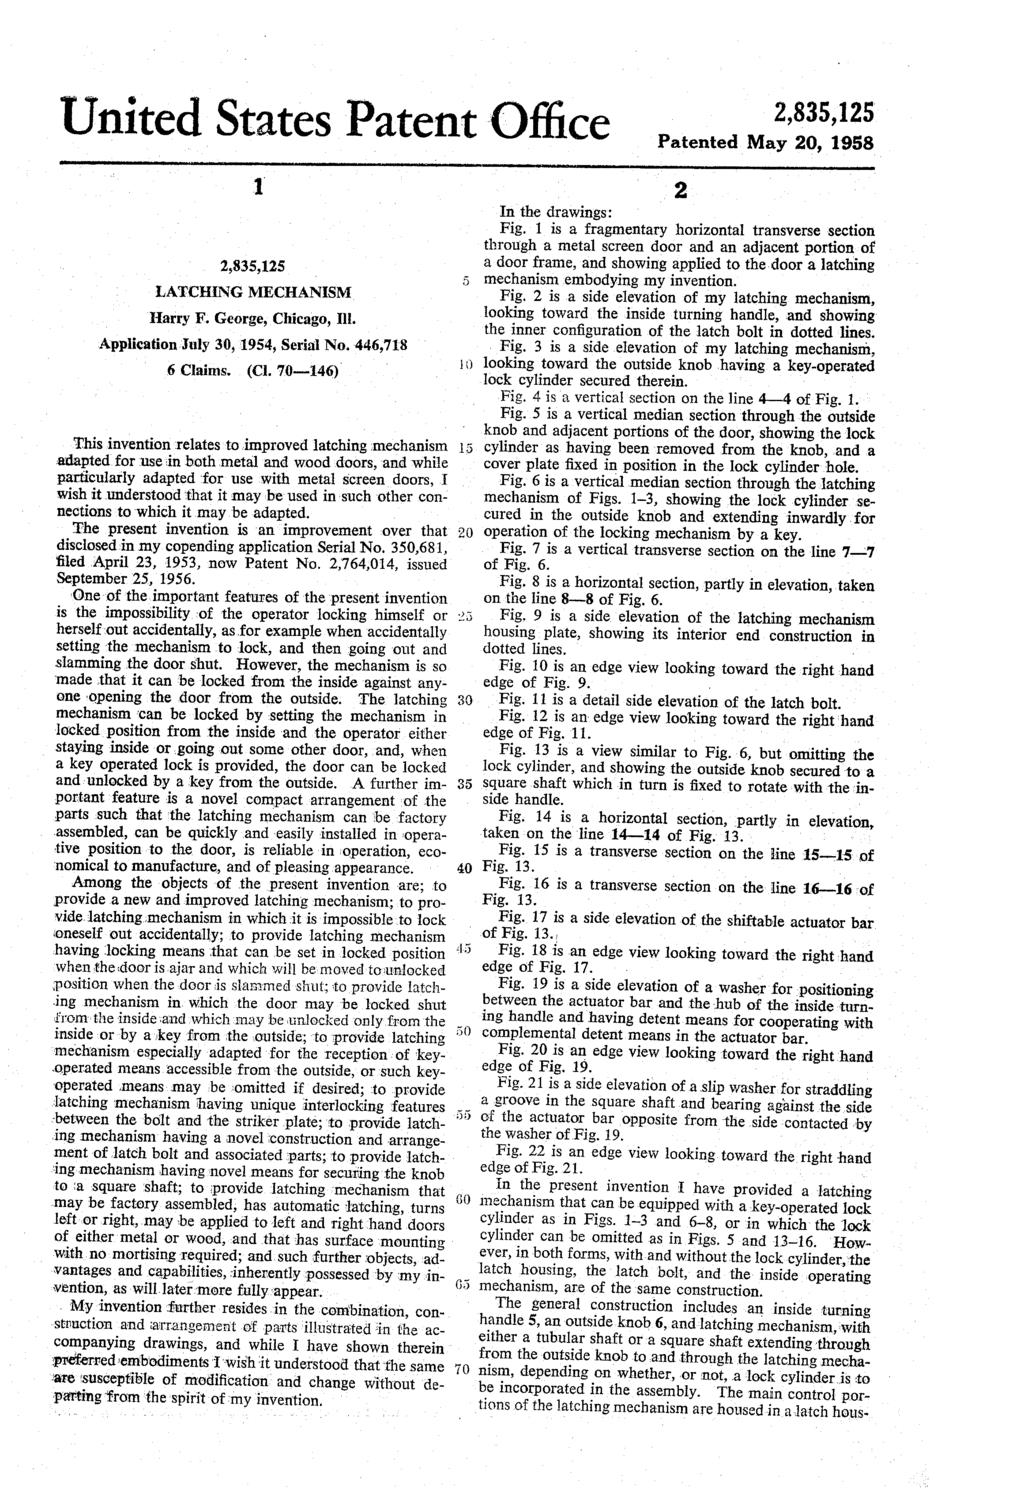 United States Patent Office Patented May, 1958 LATCHING MECHANISM Harry F. George, Chicago, Ill. Application July 30, 1954, Serial No. 446,718 6 Claims. (CI.